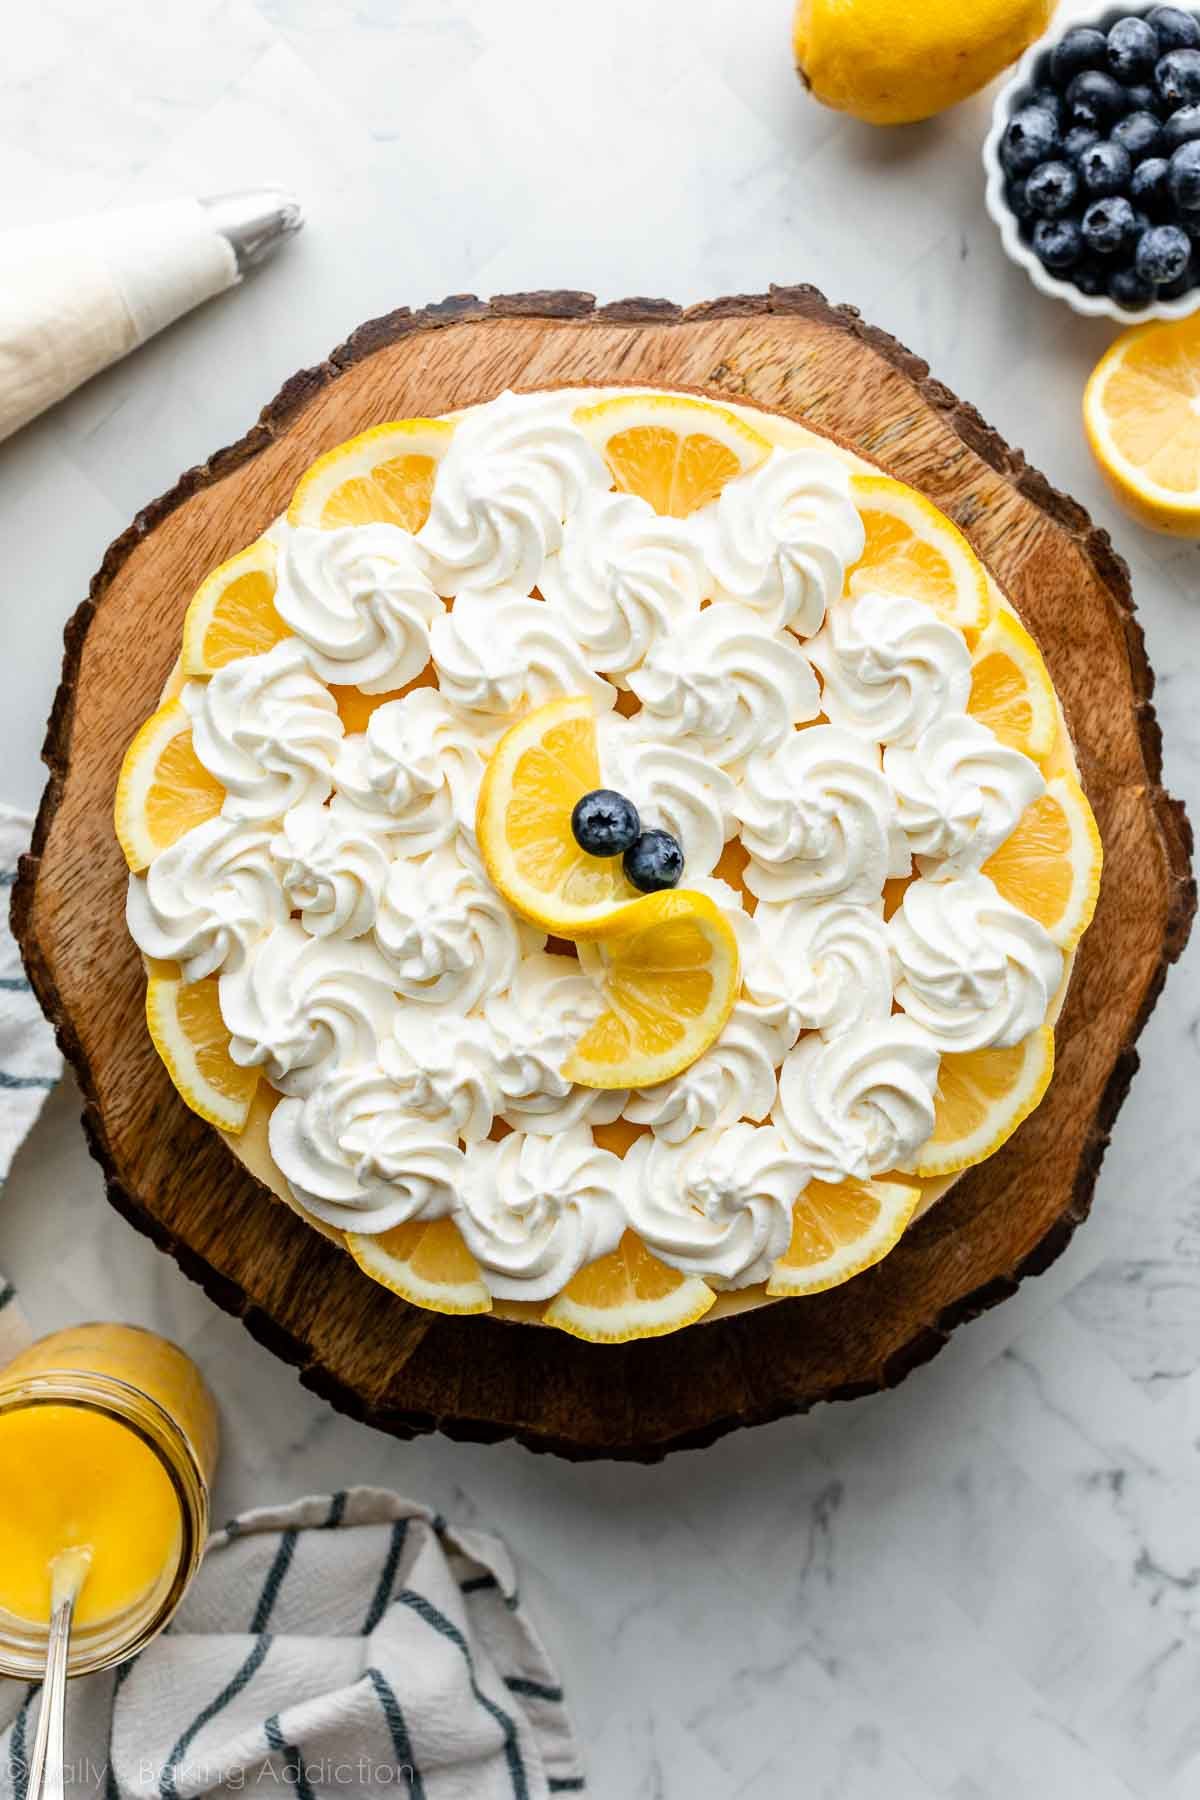 lemon cheesecake with piped whipped cream and lemon slices sitting on wooden cake stand.